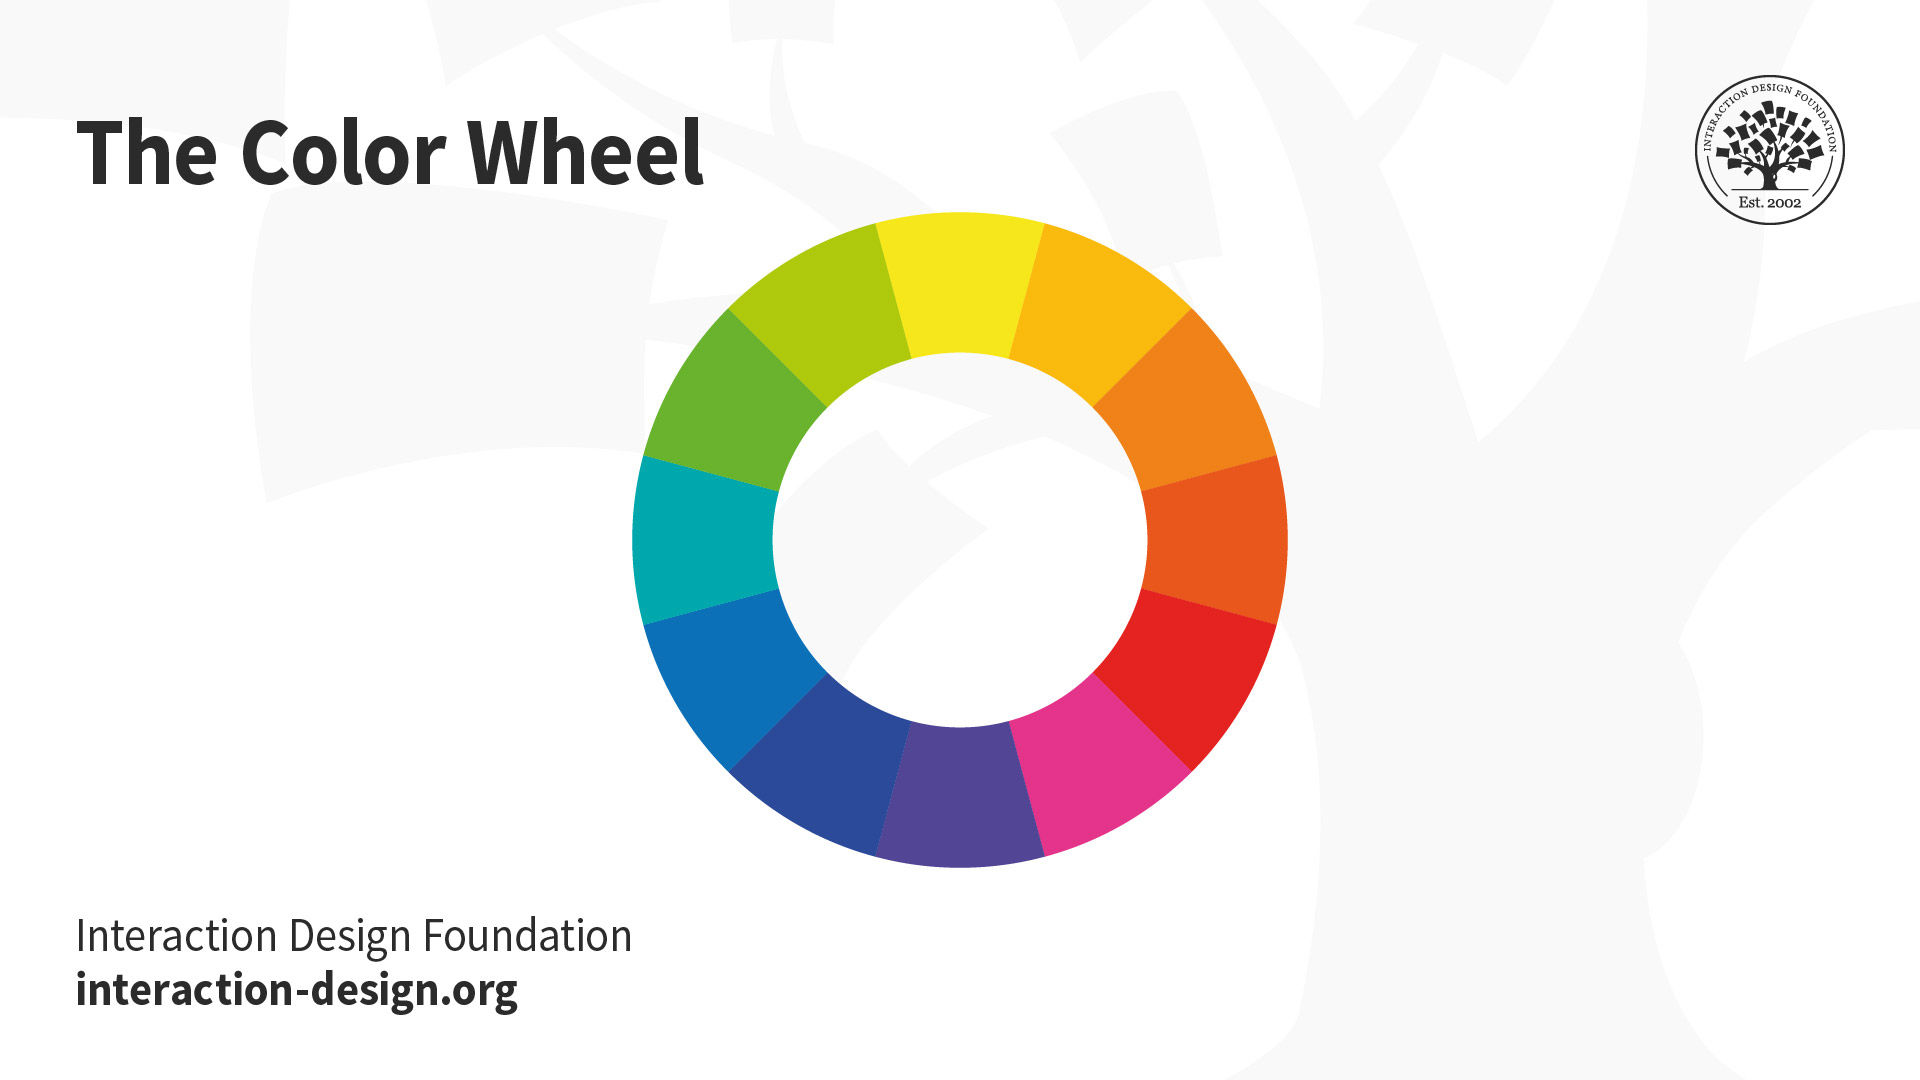 Illustration depicting the color wheel